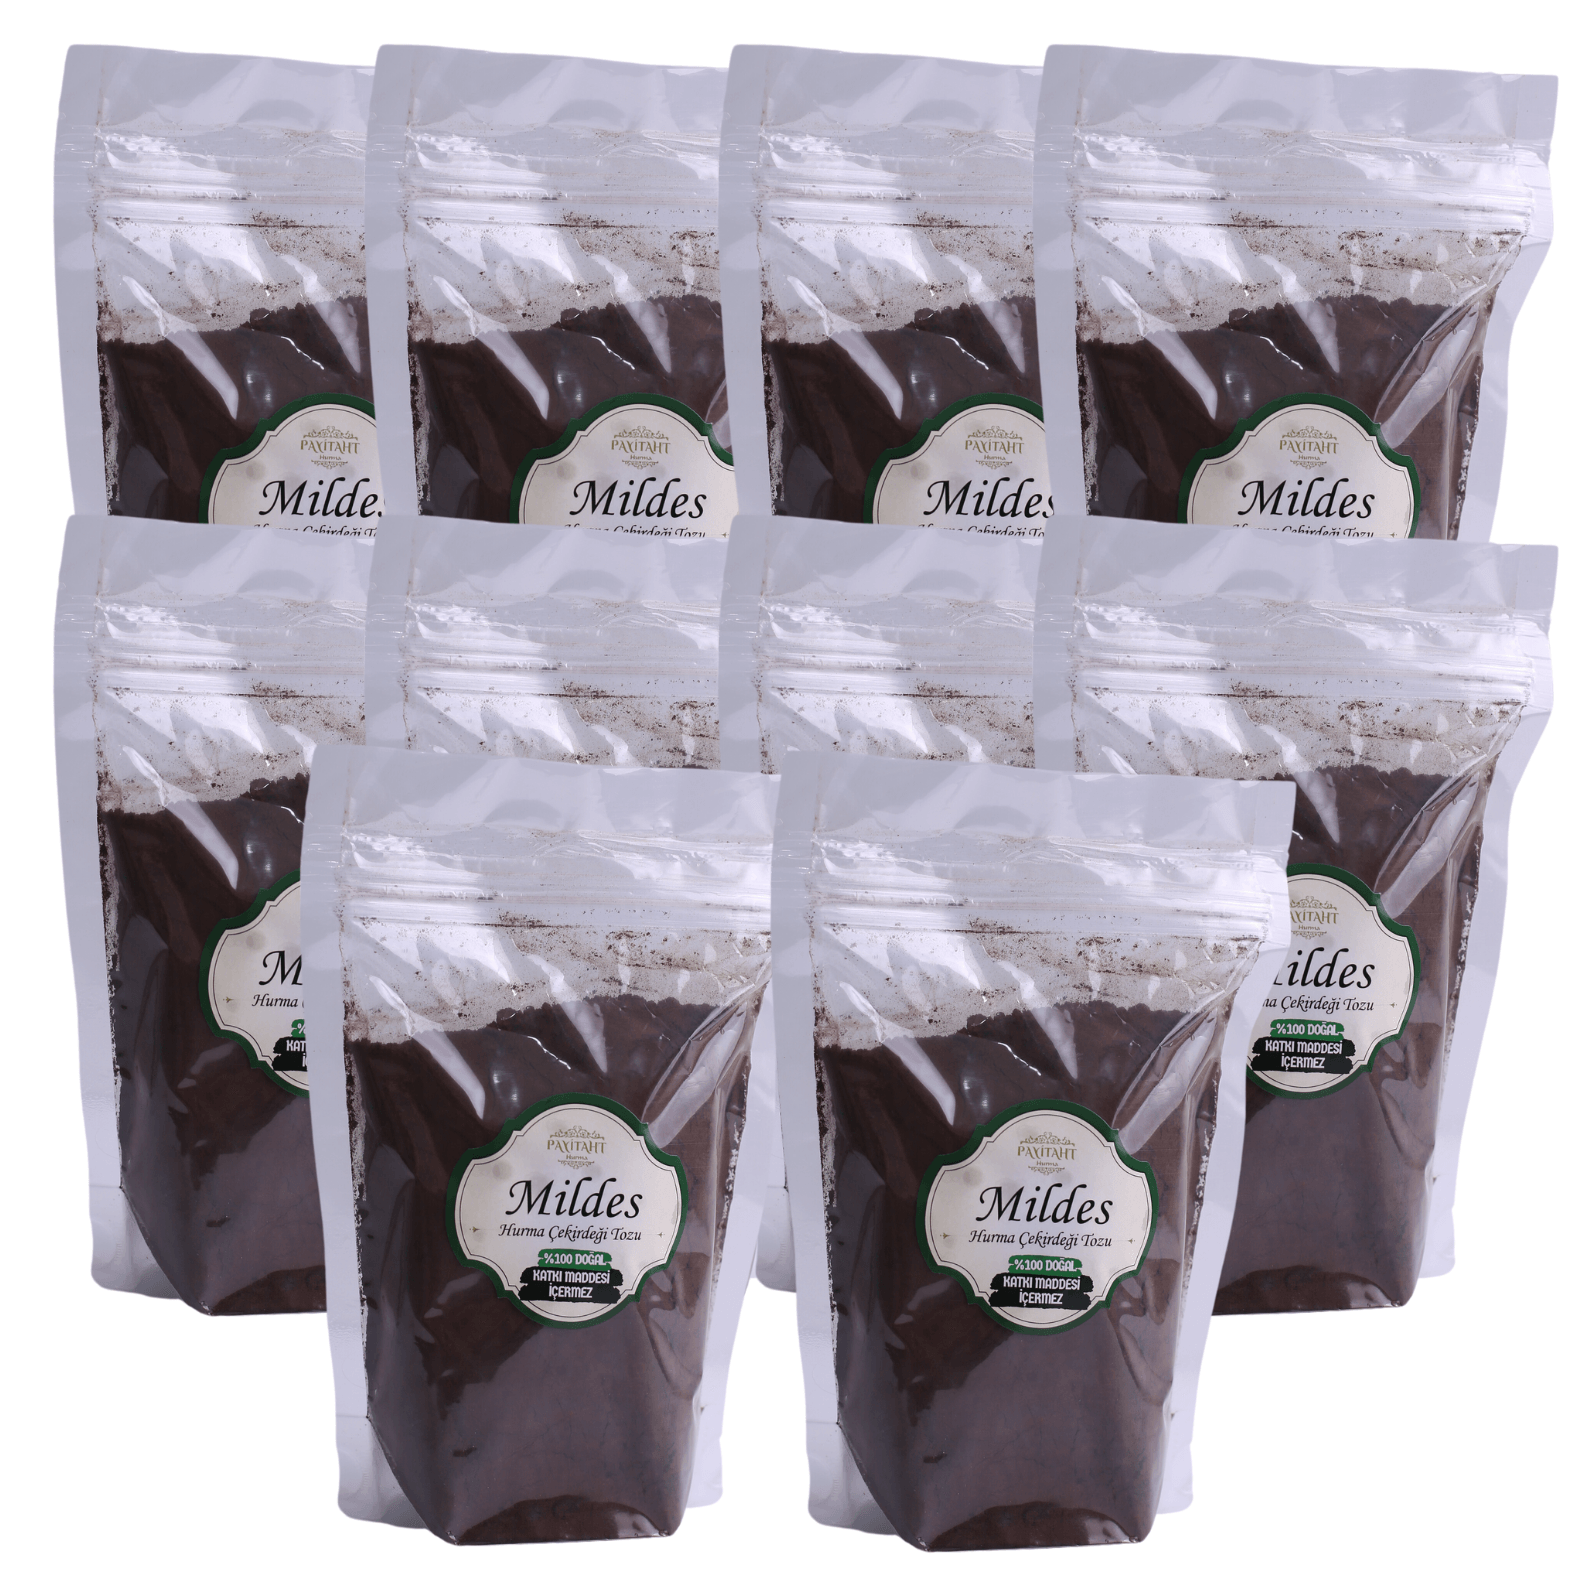 PAYITAHT HURMA-MILDES GROUND PURE DATE SEED POWDER 400 GR 10 PACKAGE